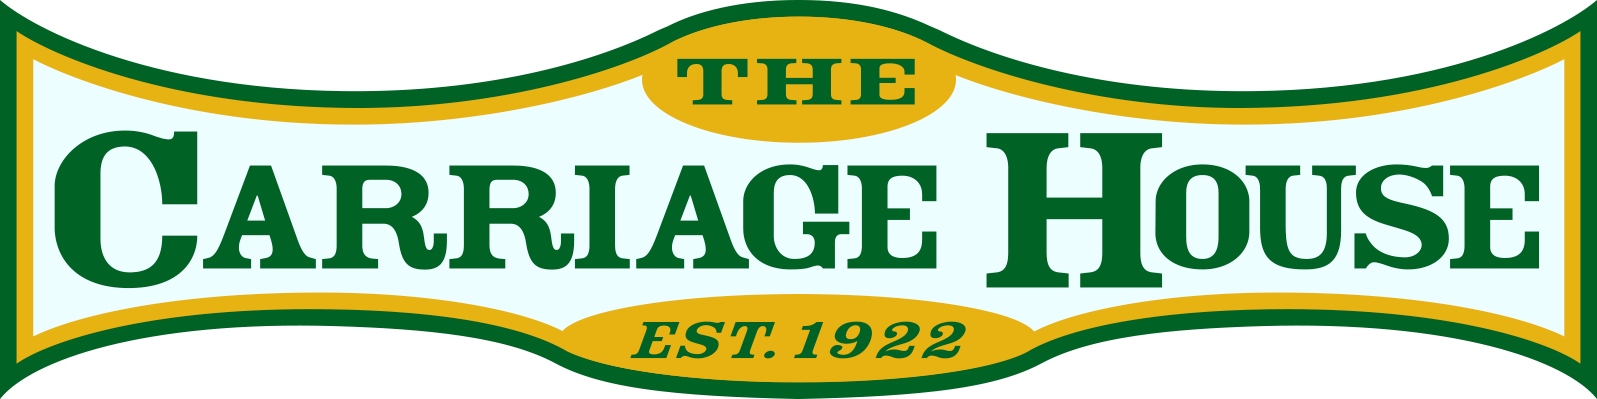 The Carriage House Logo